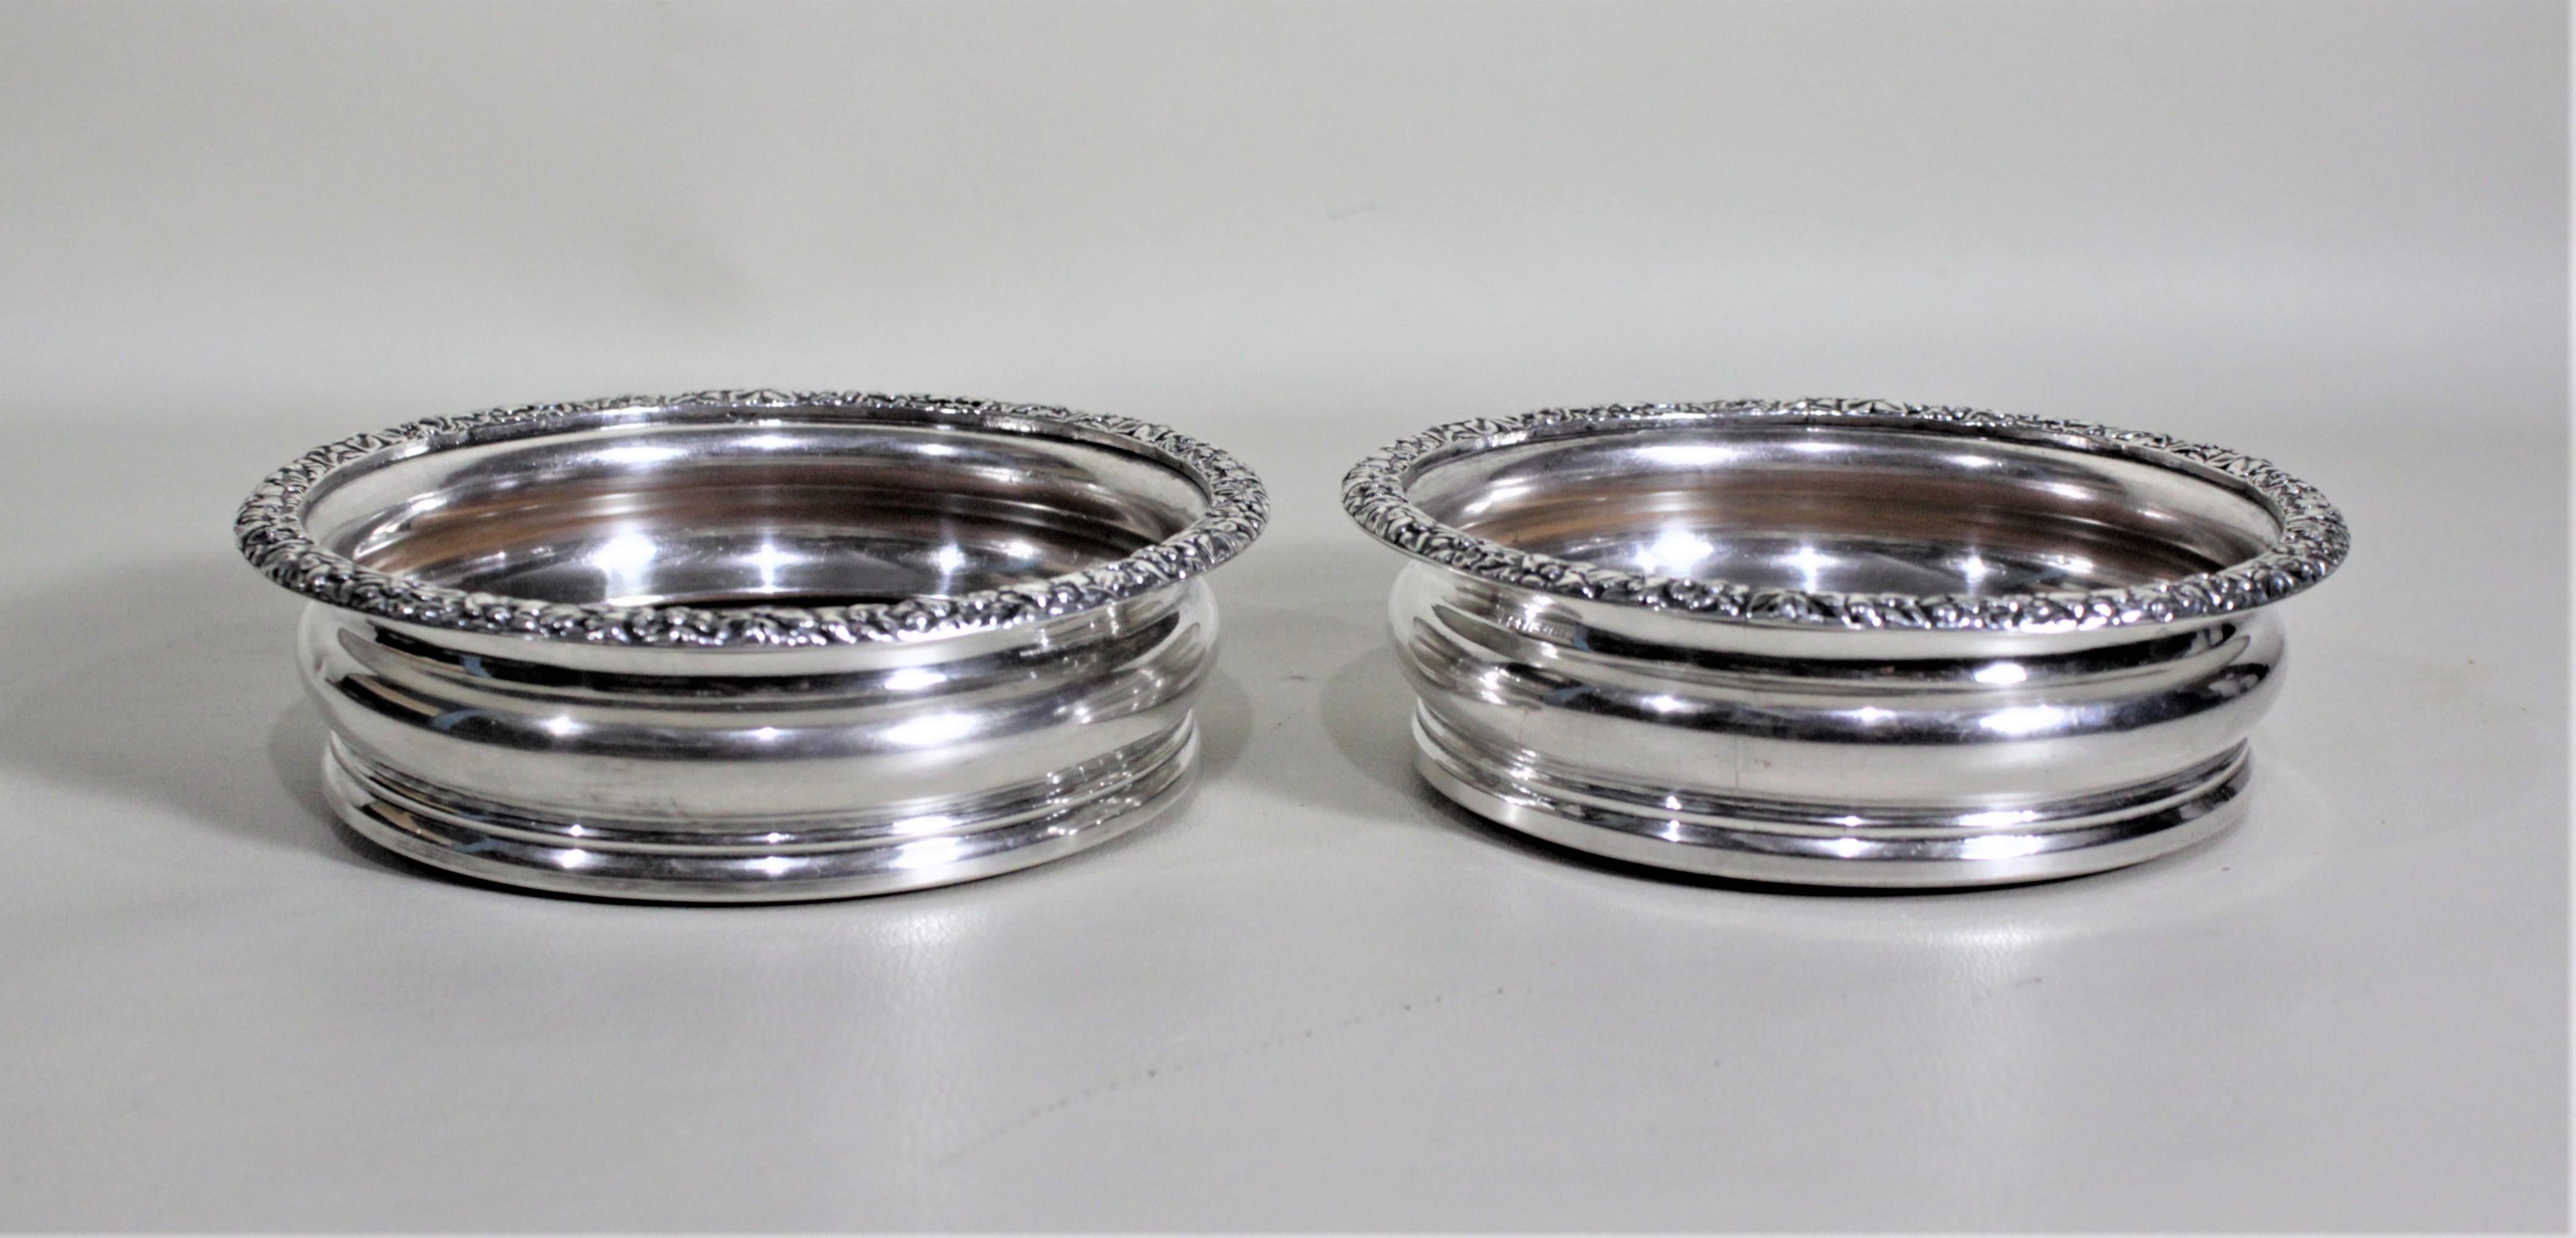 Machine-Made Pair of Antique Silver Plated Wine Bottle Coasters with Leaf & Berry Decoration